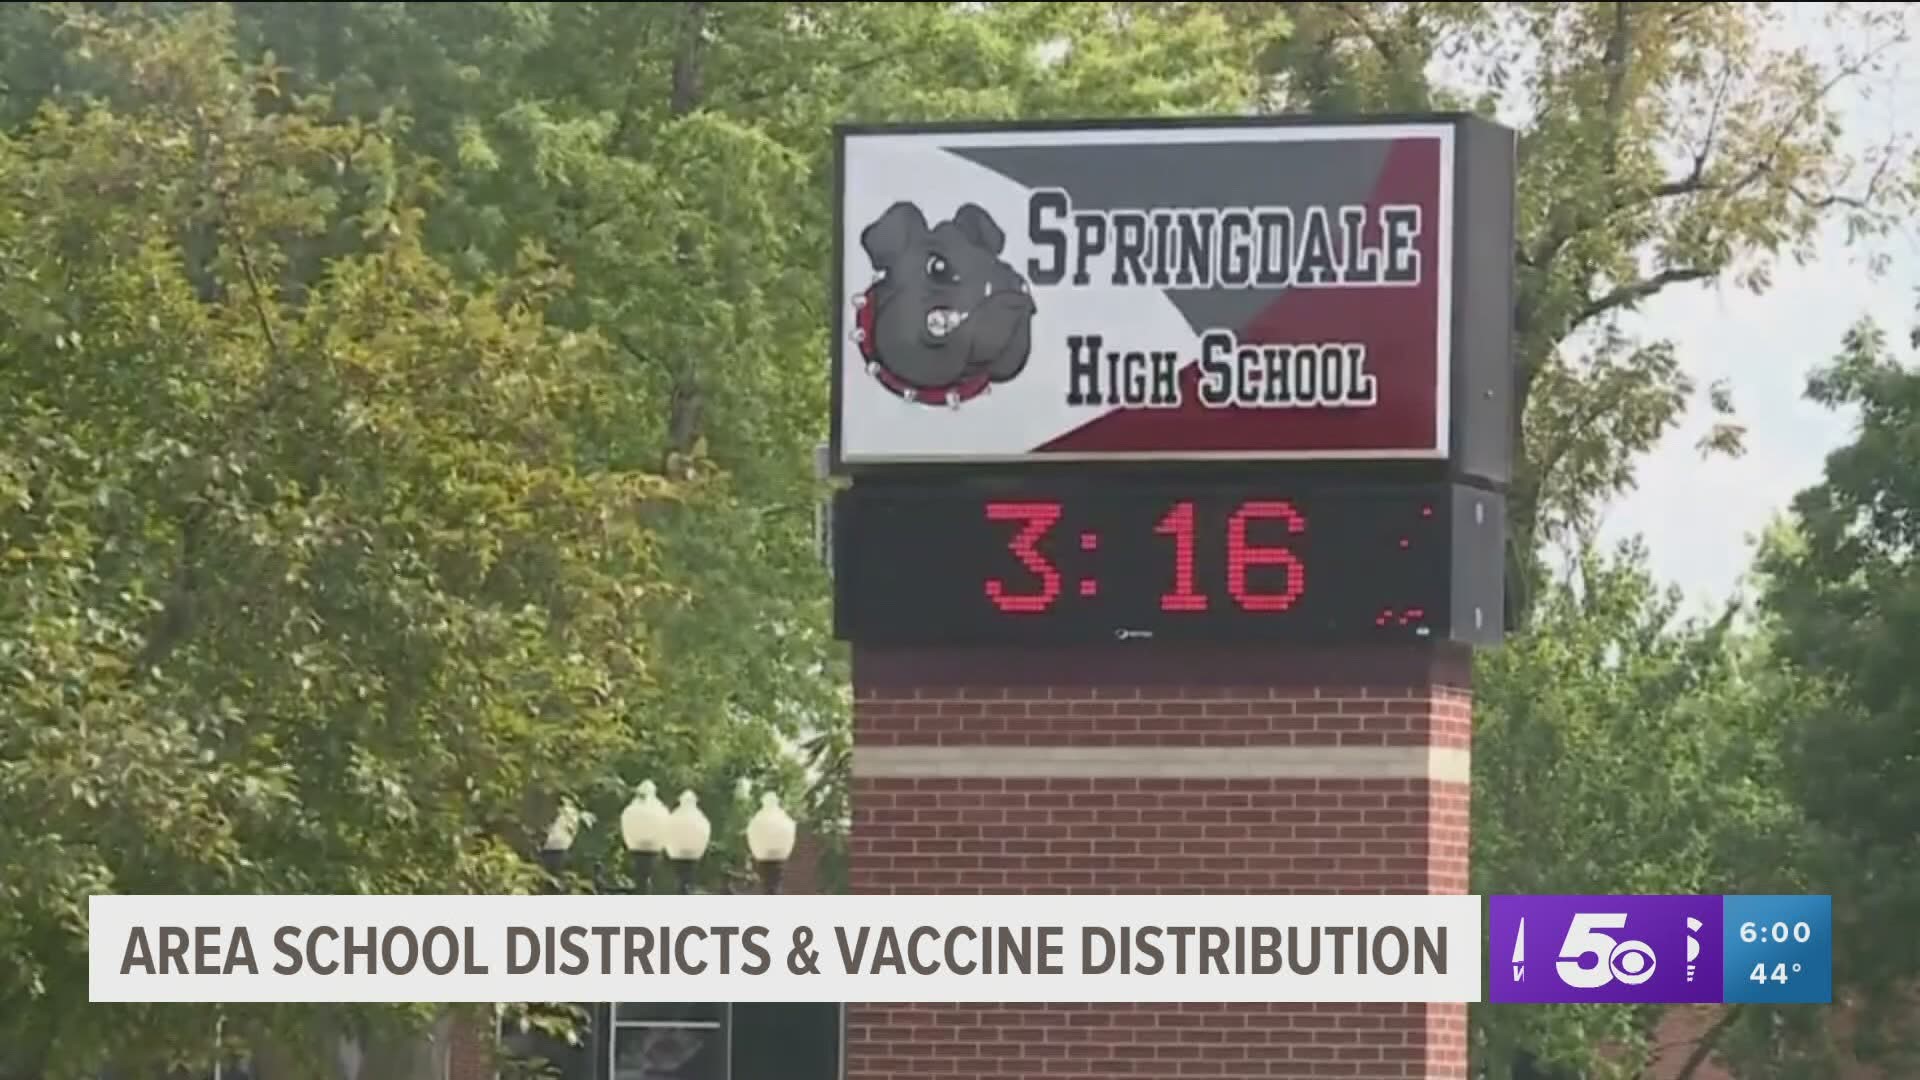 School districts have been working closely with local pharmacies and hospitals to get teachers and staff members vaccinated this week.